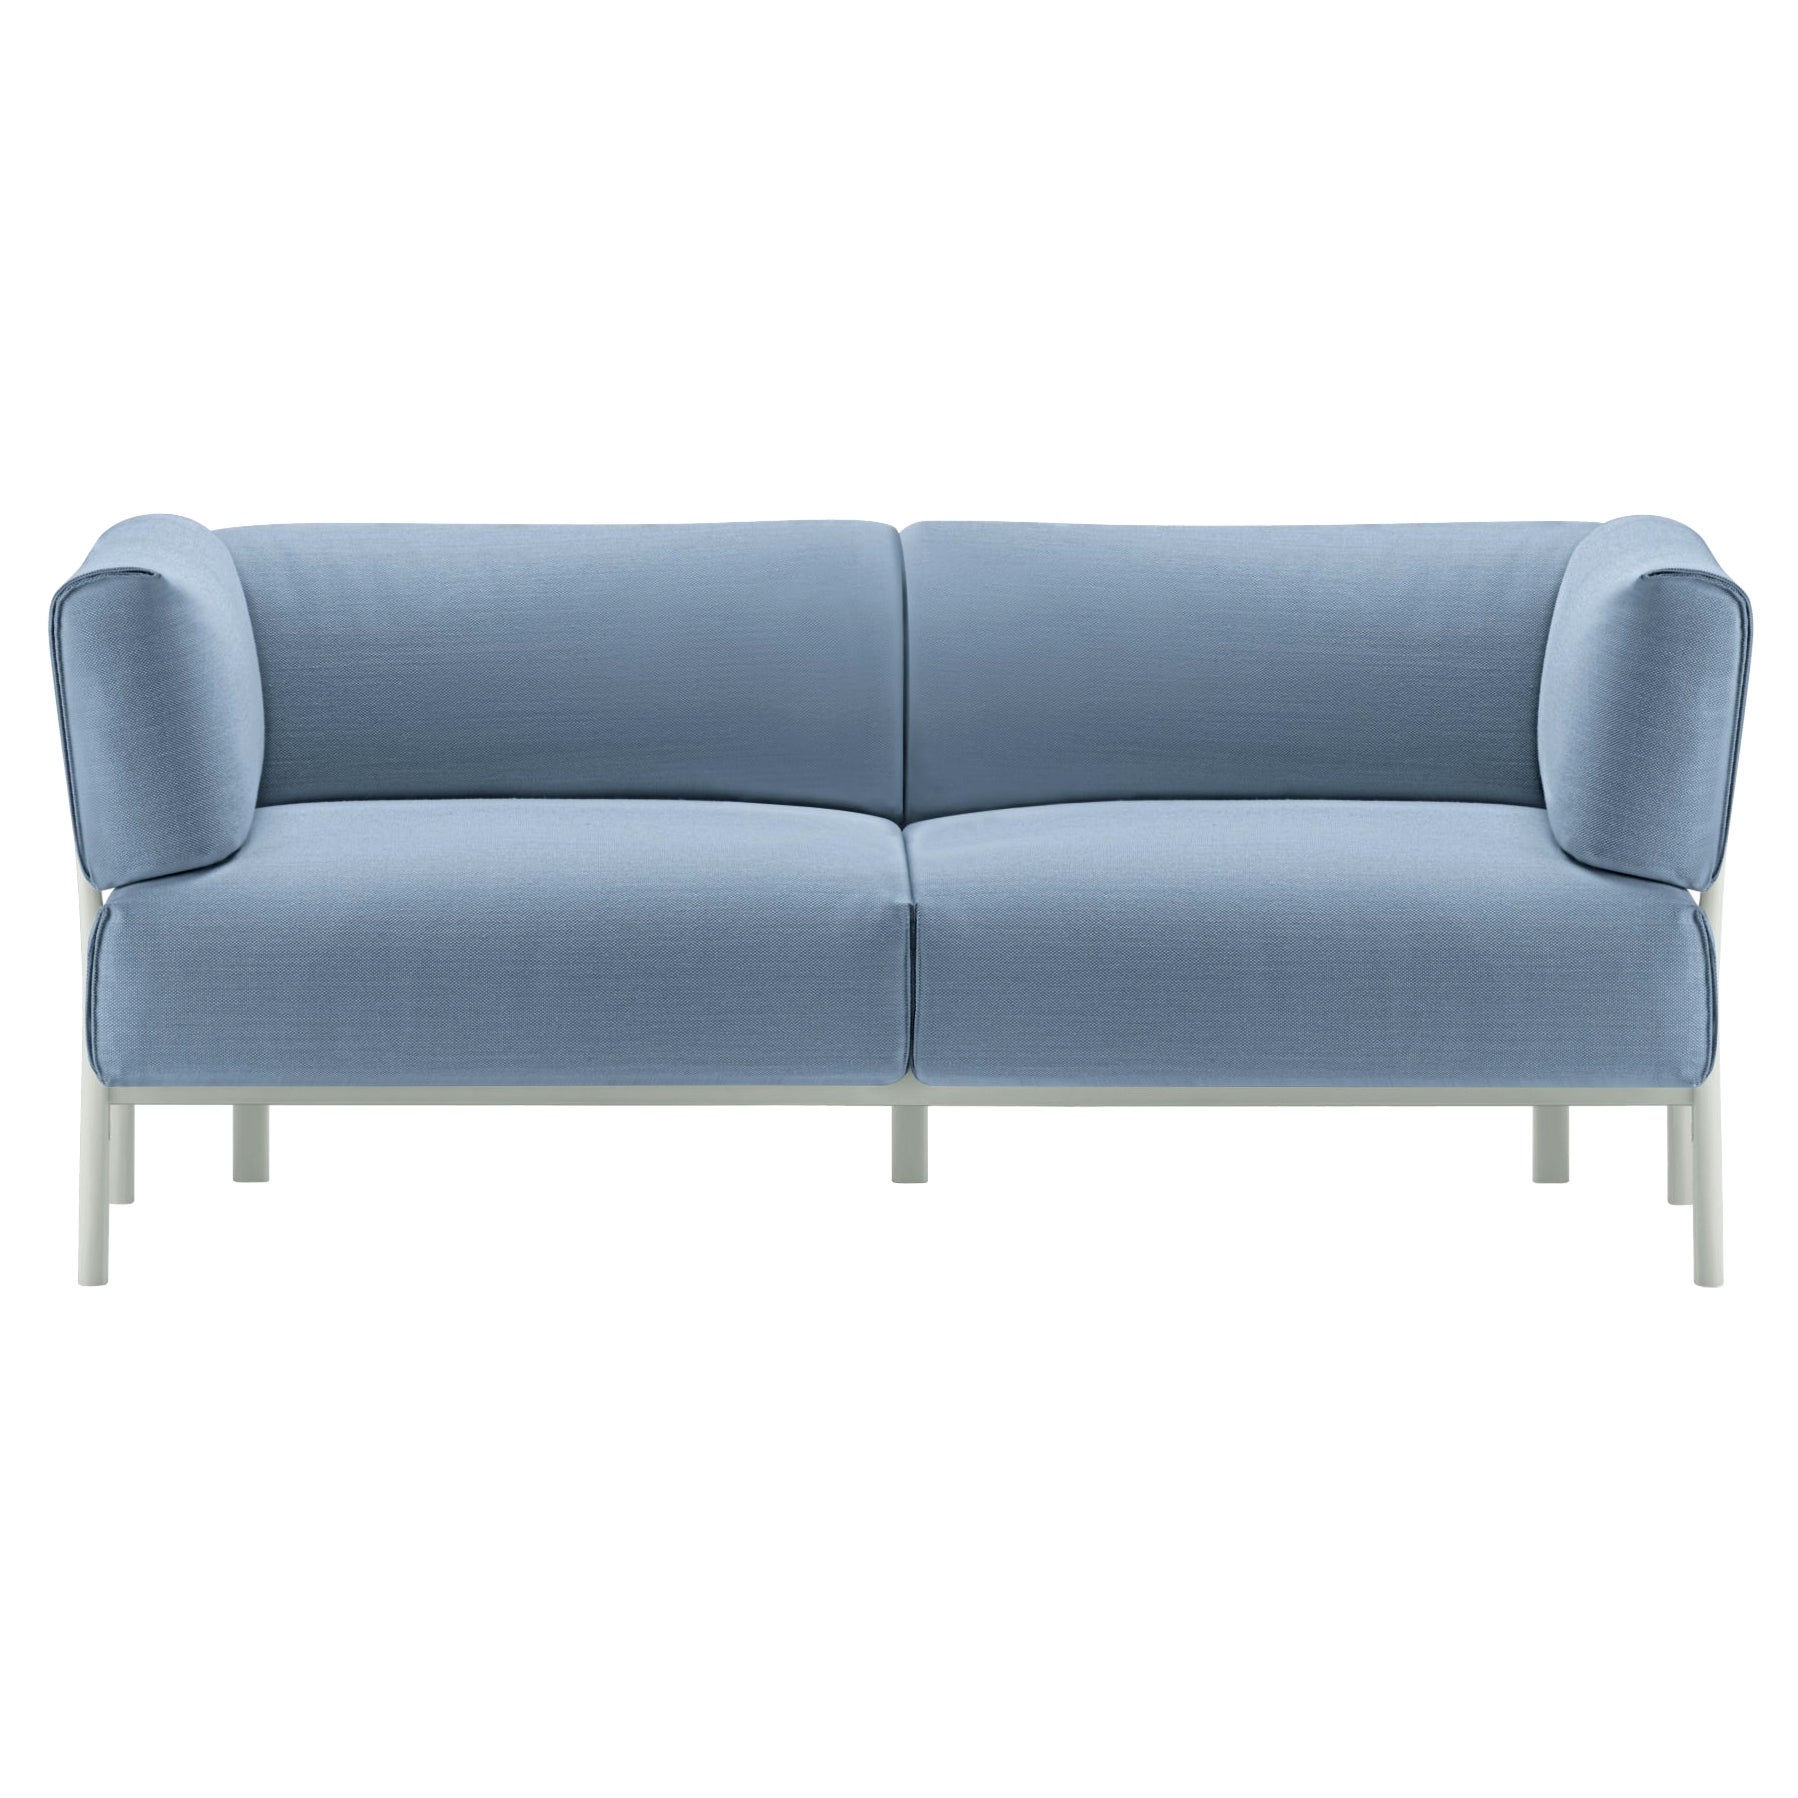 Alias 861 Eleven Sofa 2 Seater in Blue Seat and White Lacquered Aluminum Frame For Sale